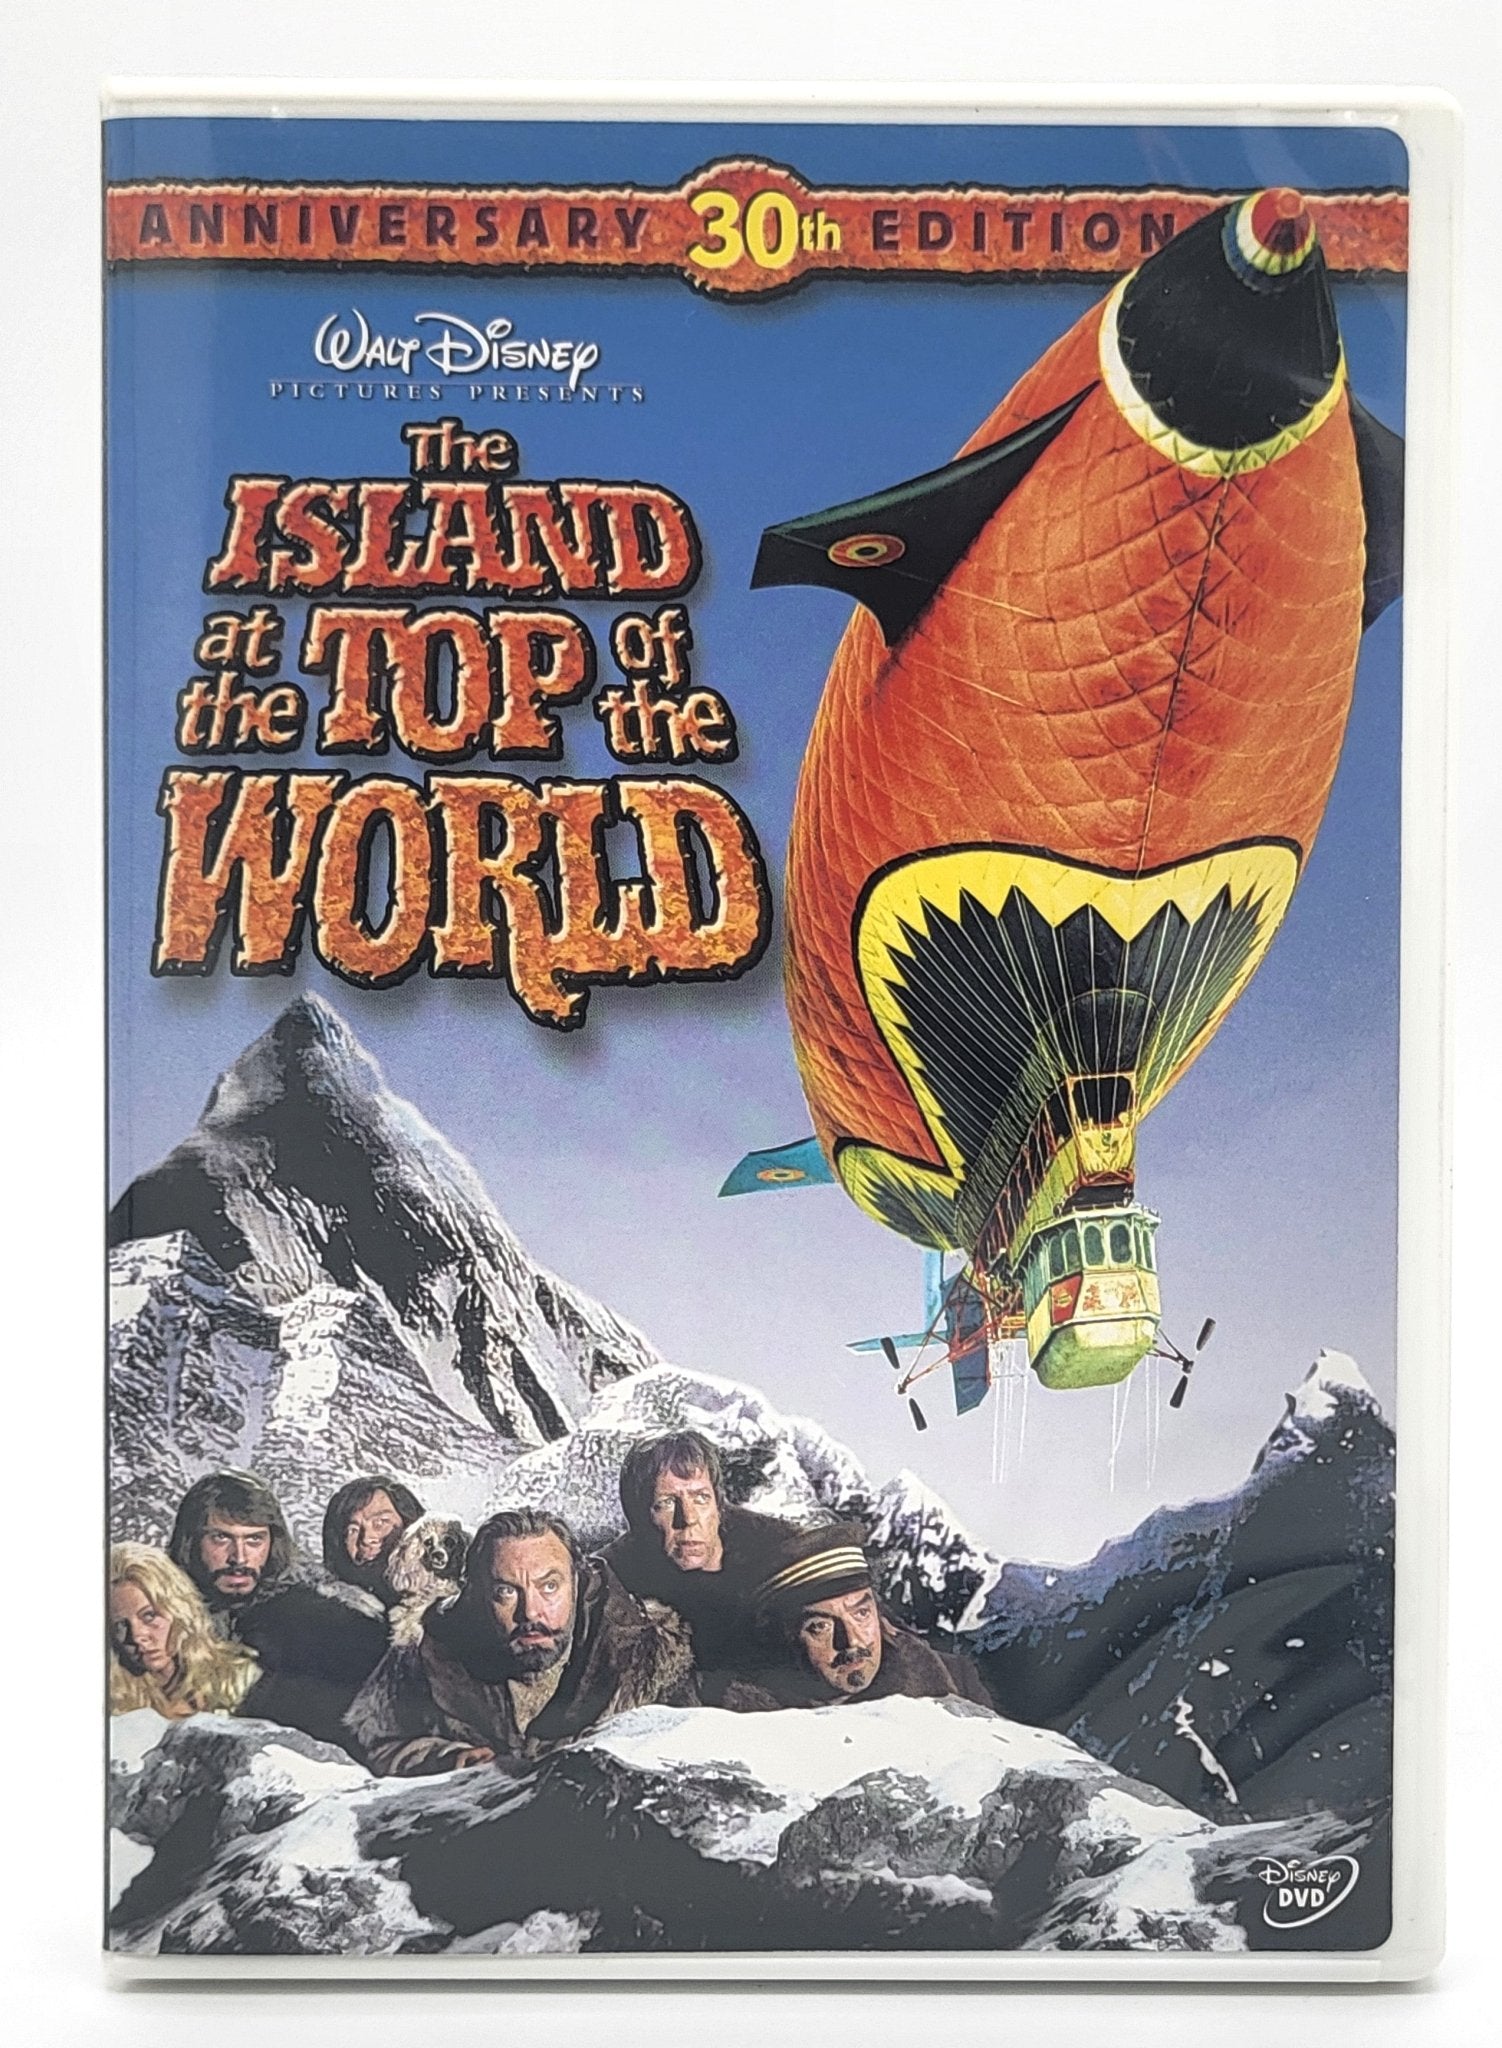 Disney DVD - The Island at the Top of the World 1974 | DVD | 30th Anniversary Edition - DVD - Steady Bunny Shop